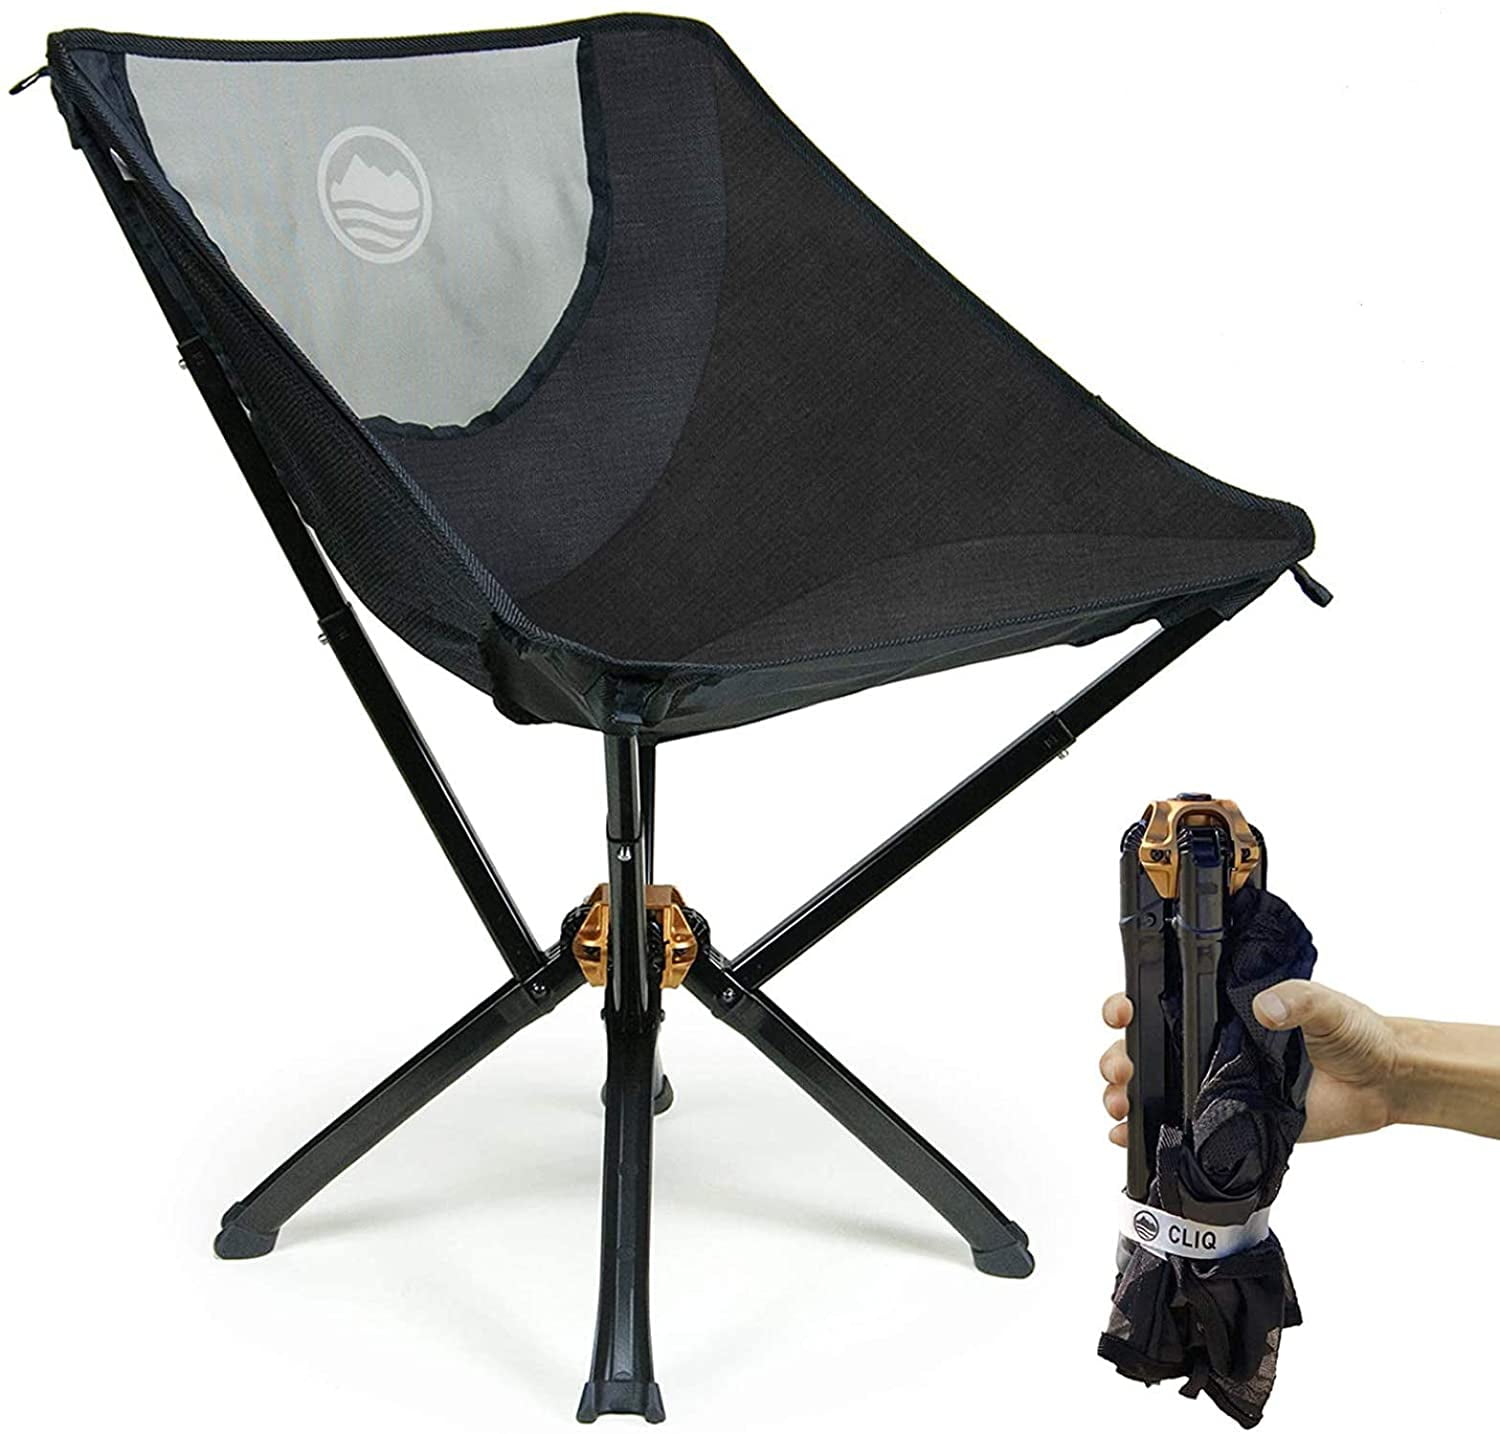 Cliq Camping Chair - Most Funded Portable Chair in Crowdfunding 